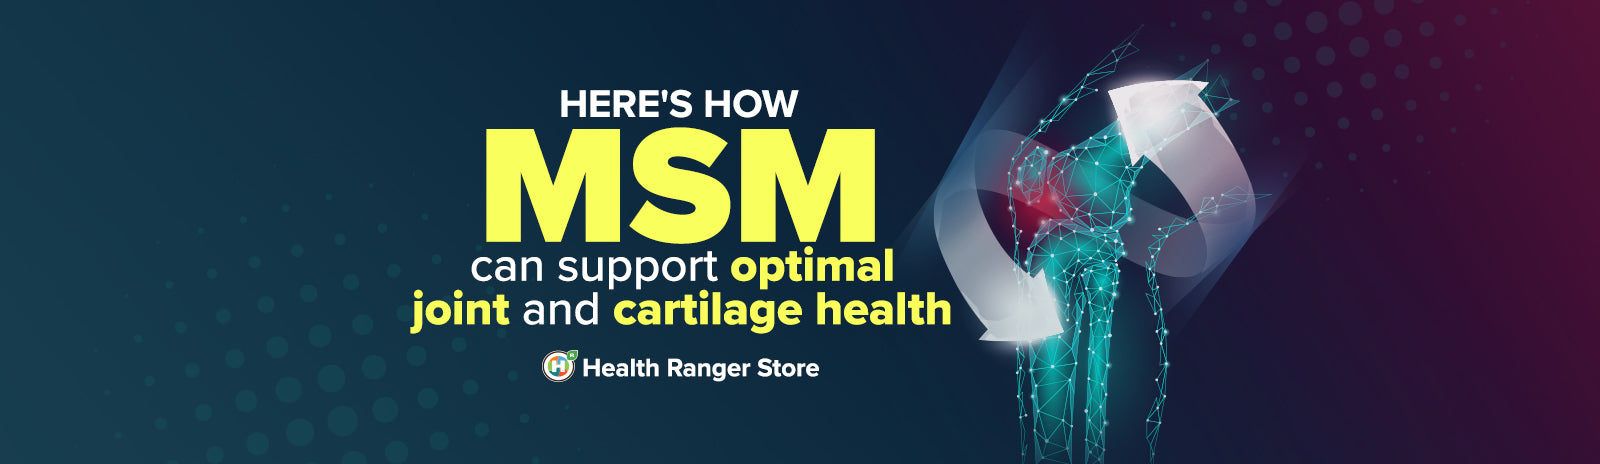 The link between OptiMSM and optimal joint and cartilage health